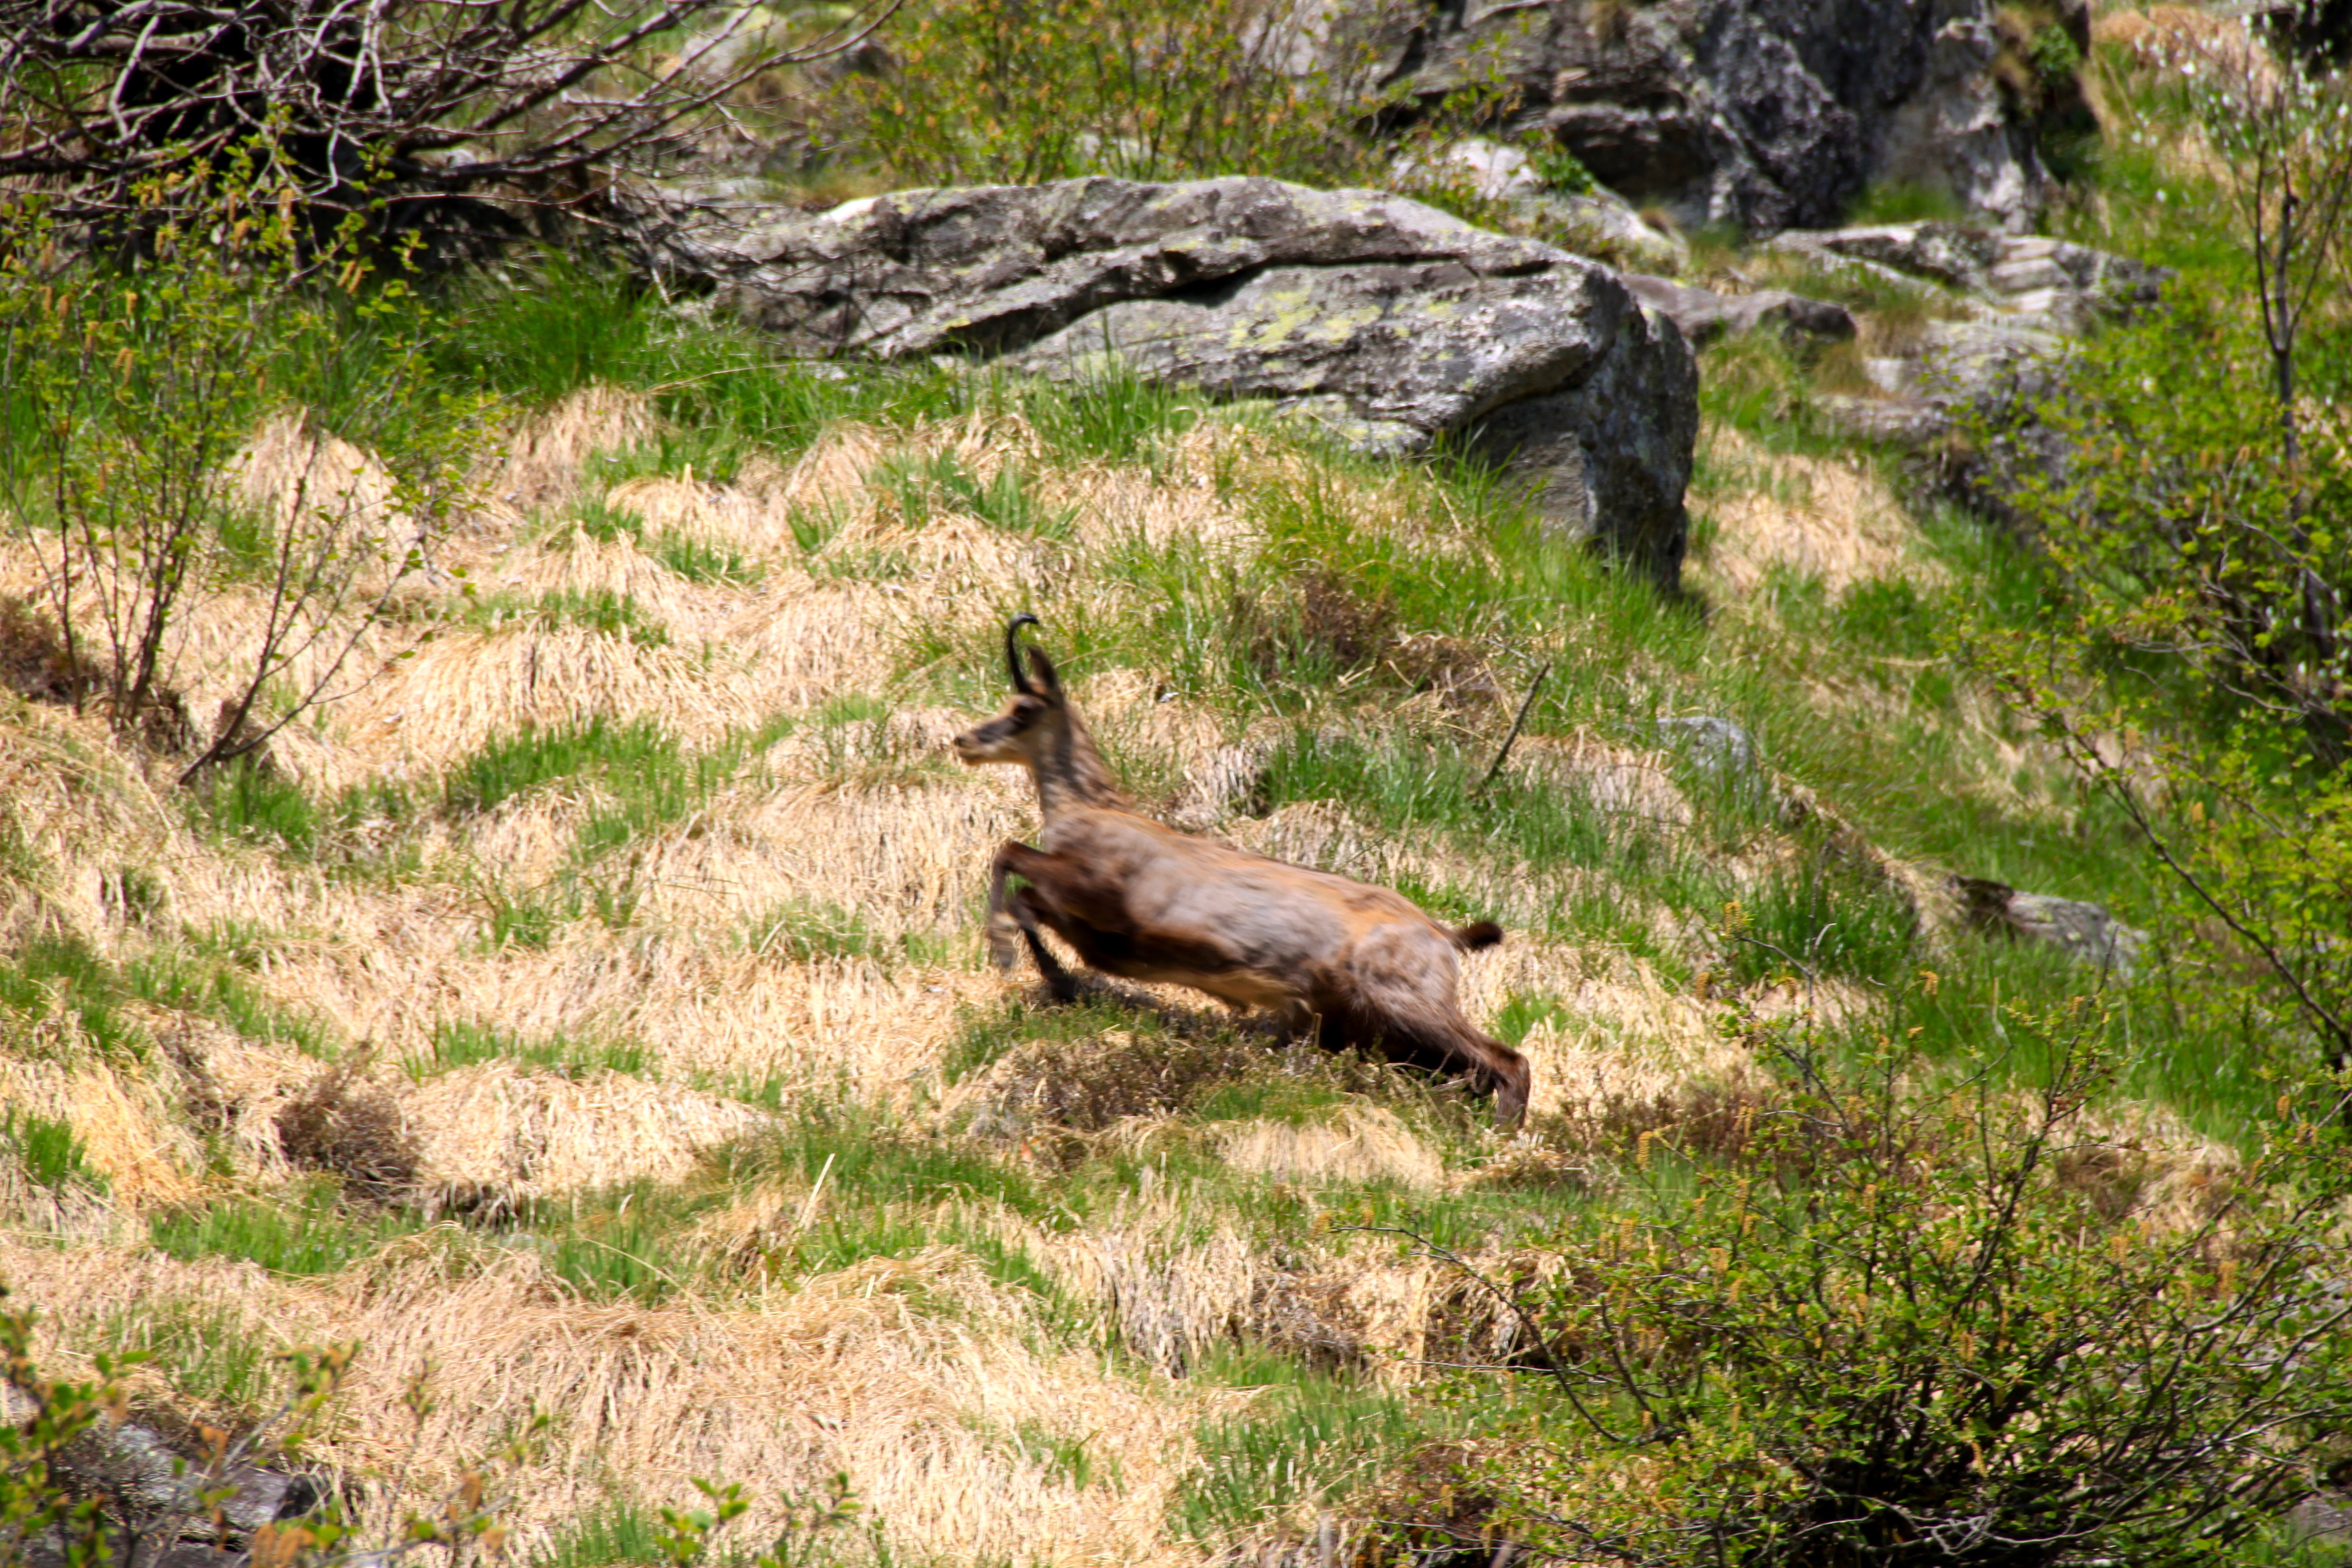 A chamois bounds across our path. Photo: Quentin Atkinson